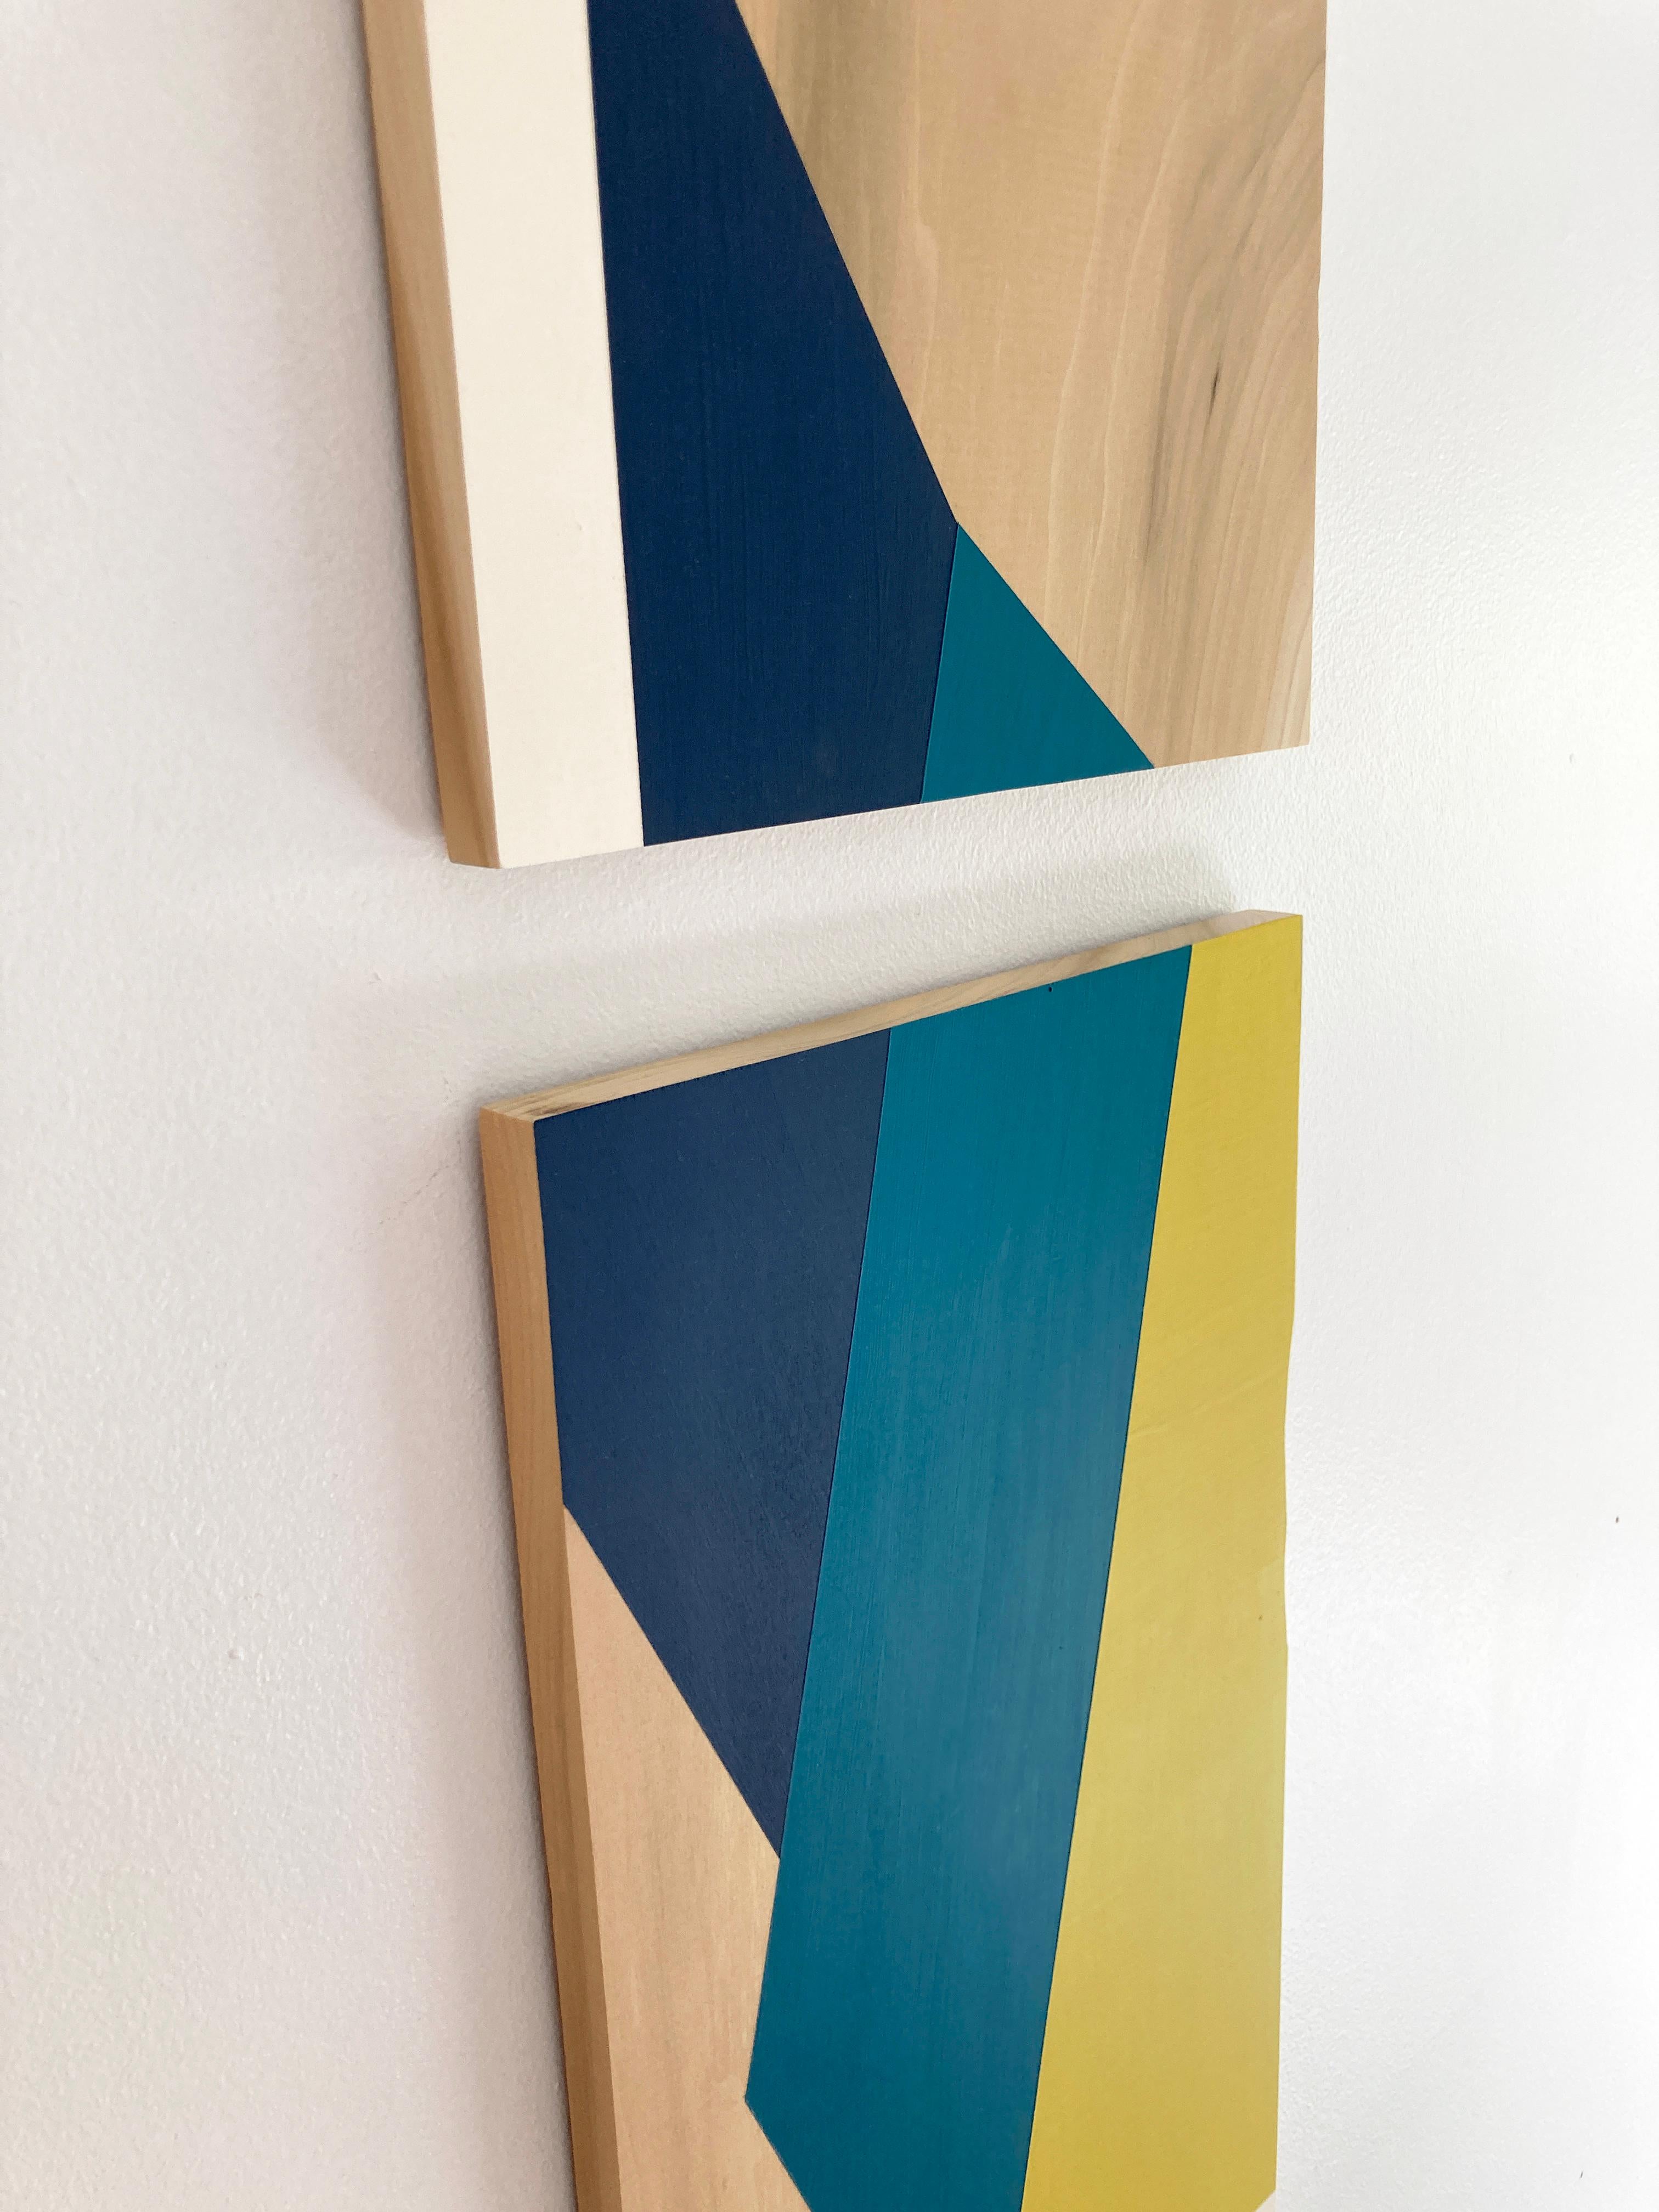 'Ascension' colorful minimalist work on panel, wood grain, modern - Painting by Nancy Talero